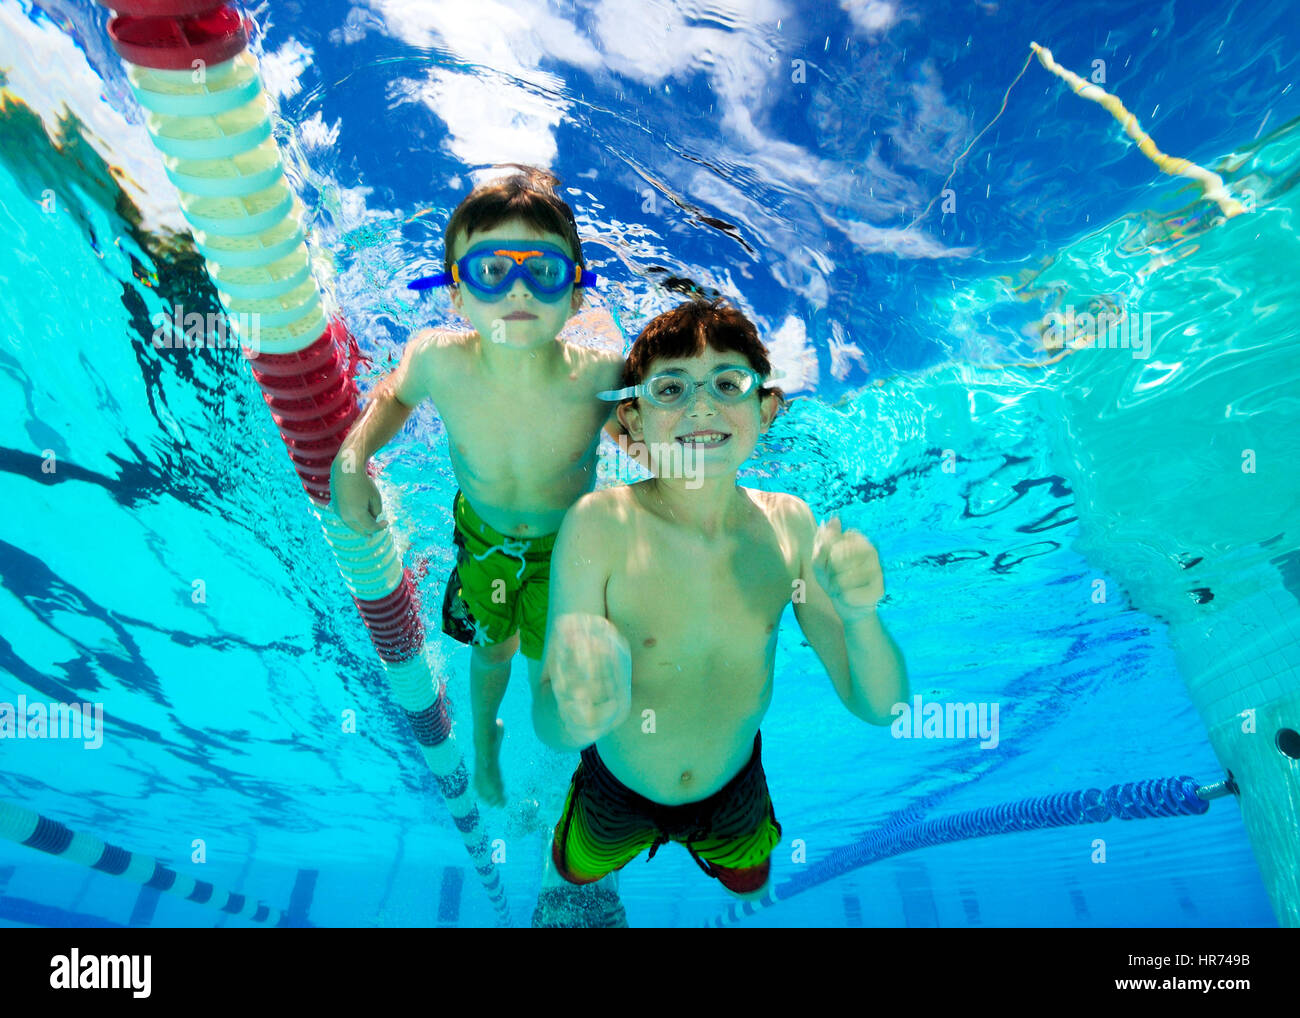 Kids swimming underwater in pool enjoying the relaxation of summer Stock Photo